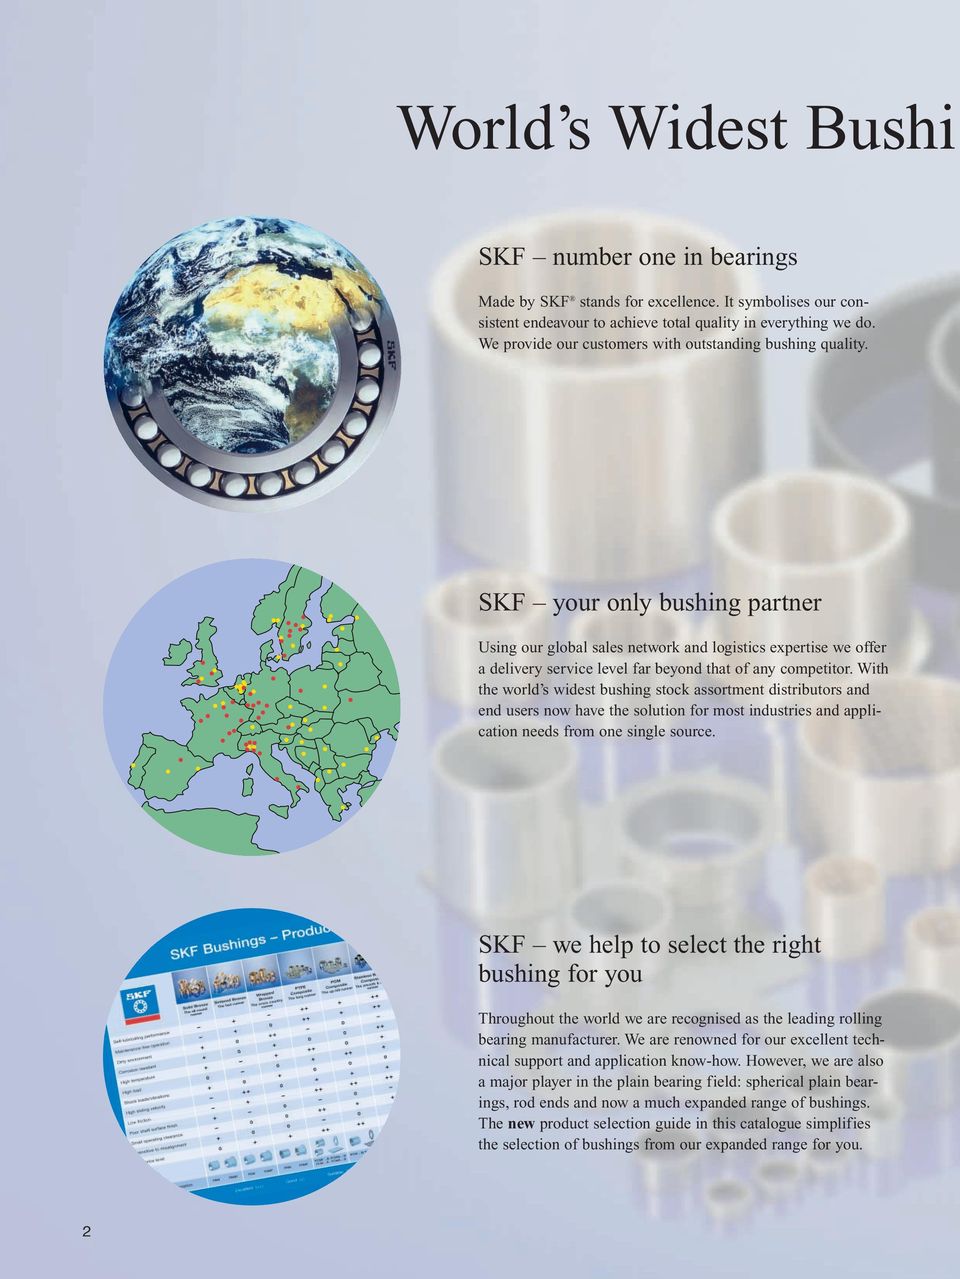 SKF your only bushing partner Using our global sales network and logistics expertise we offer a delivery service level far beyond that of any competitor.